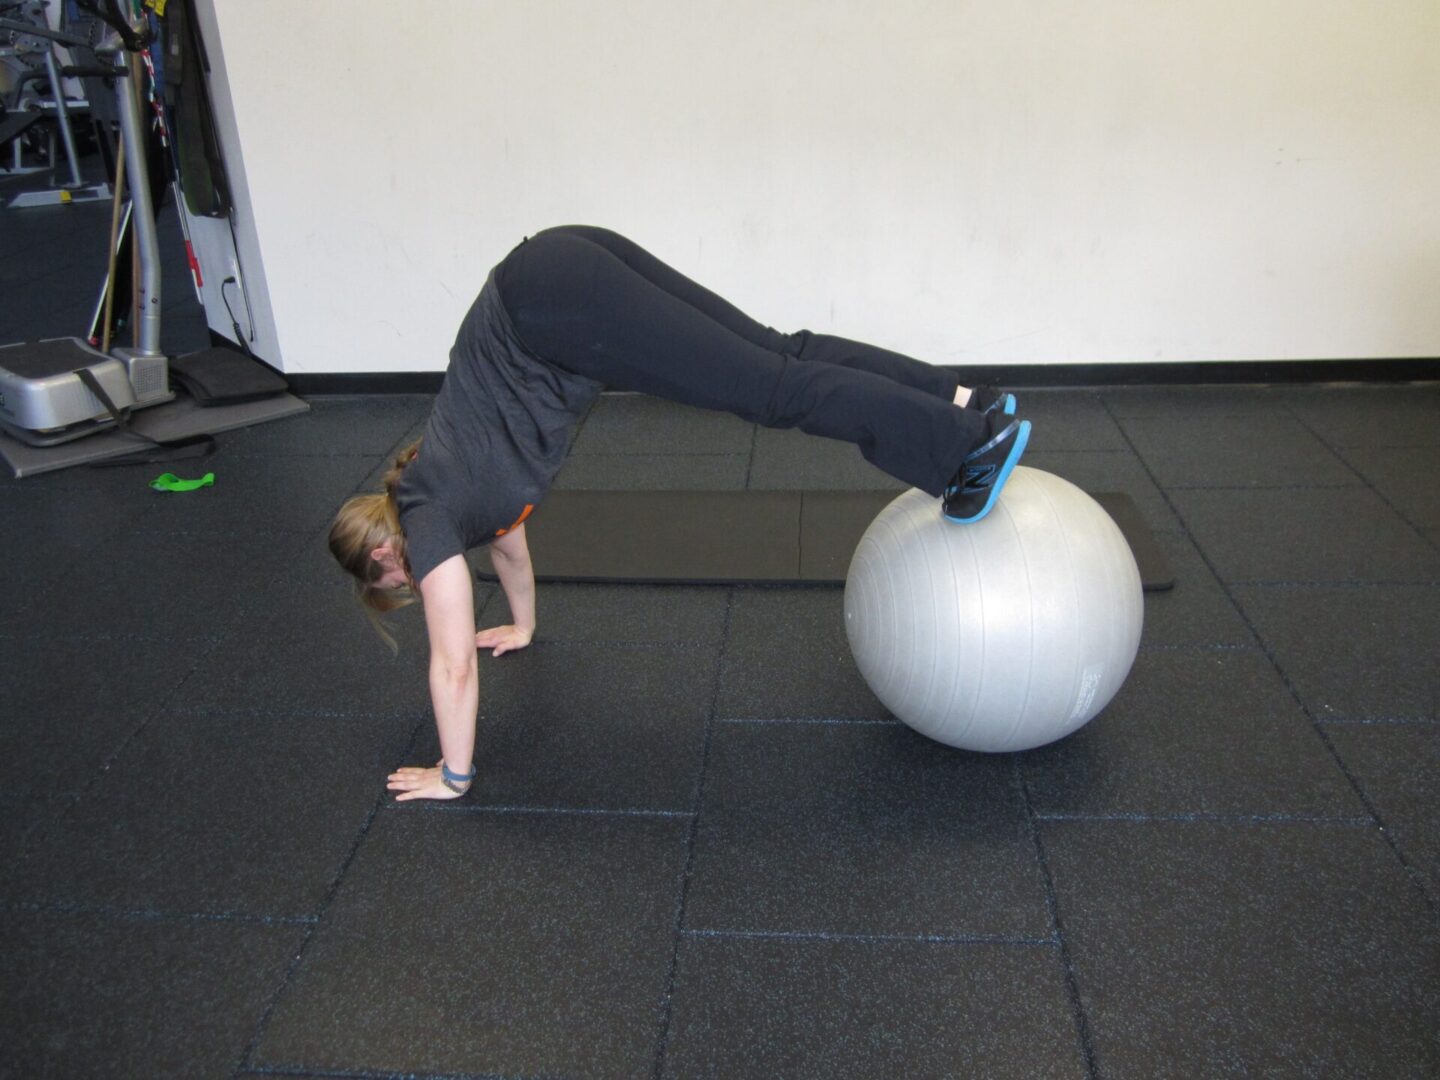 A woman is doing a handstand on an exercise ball.